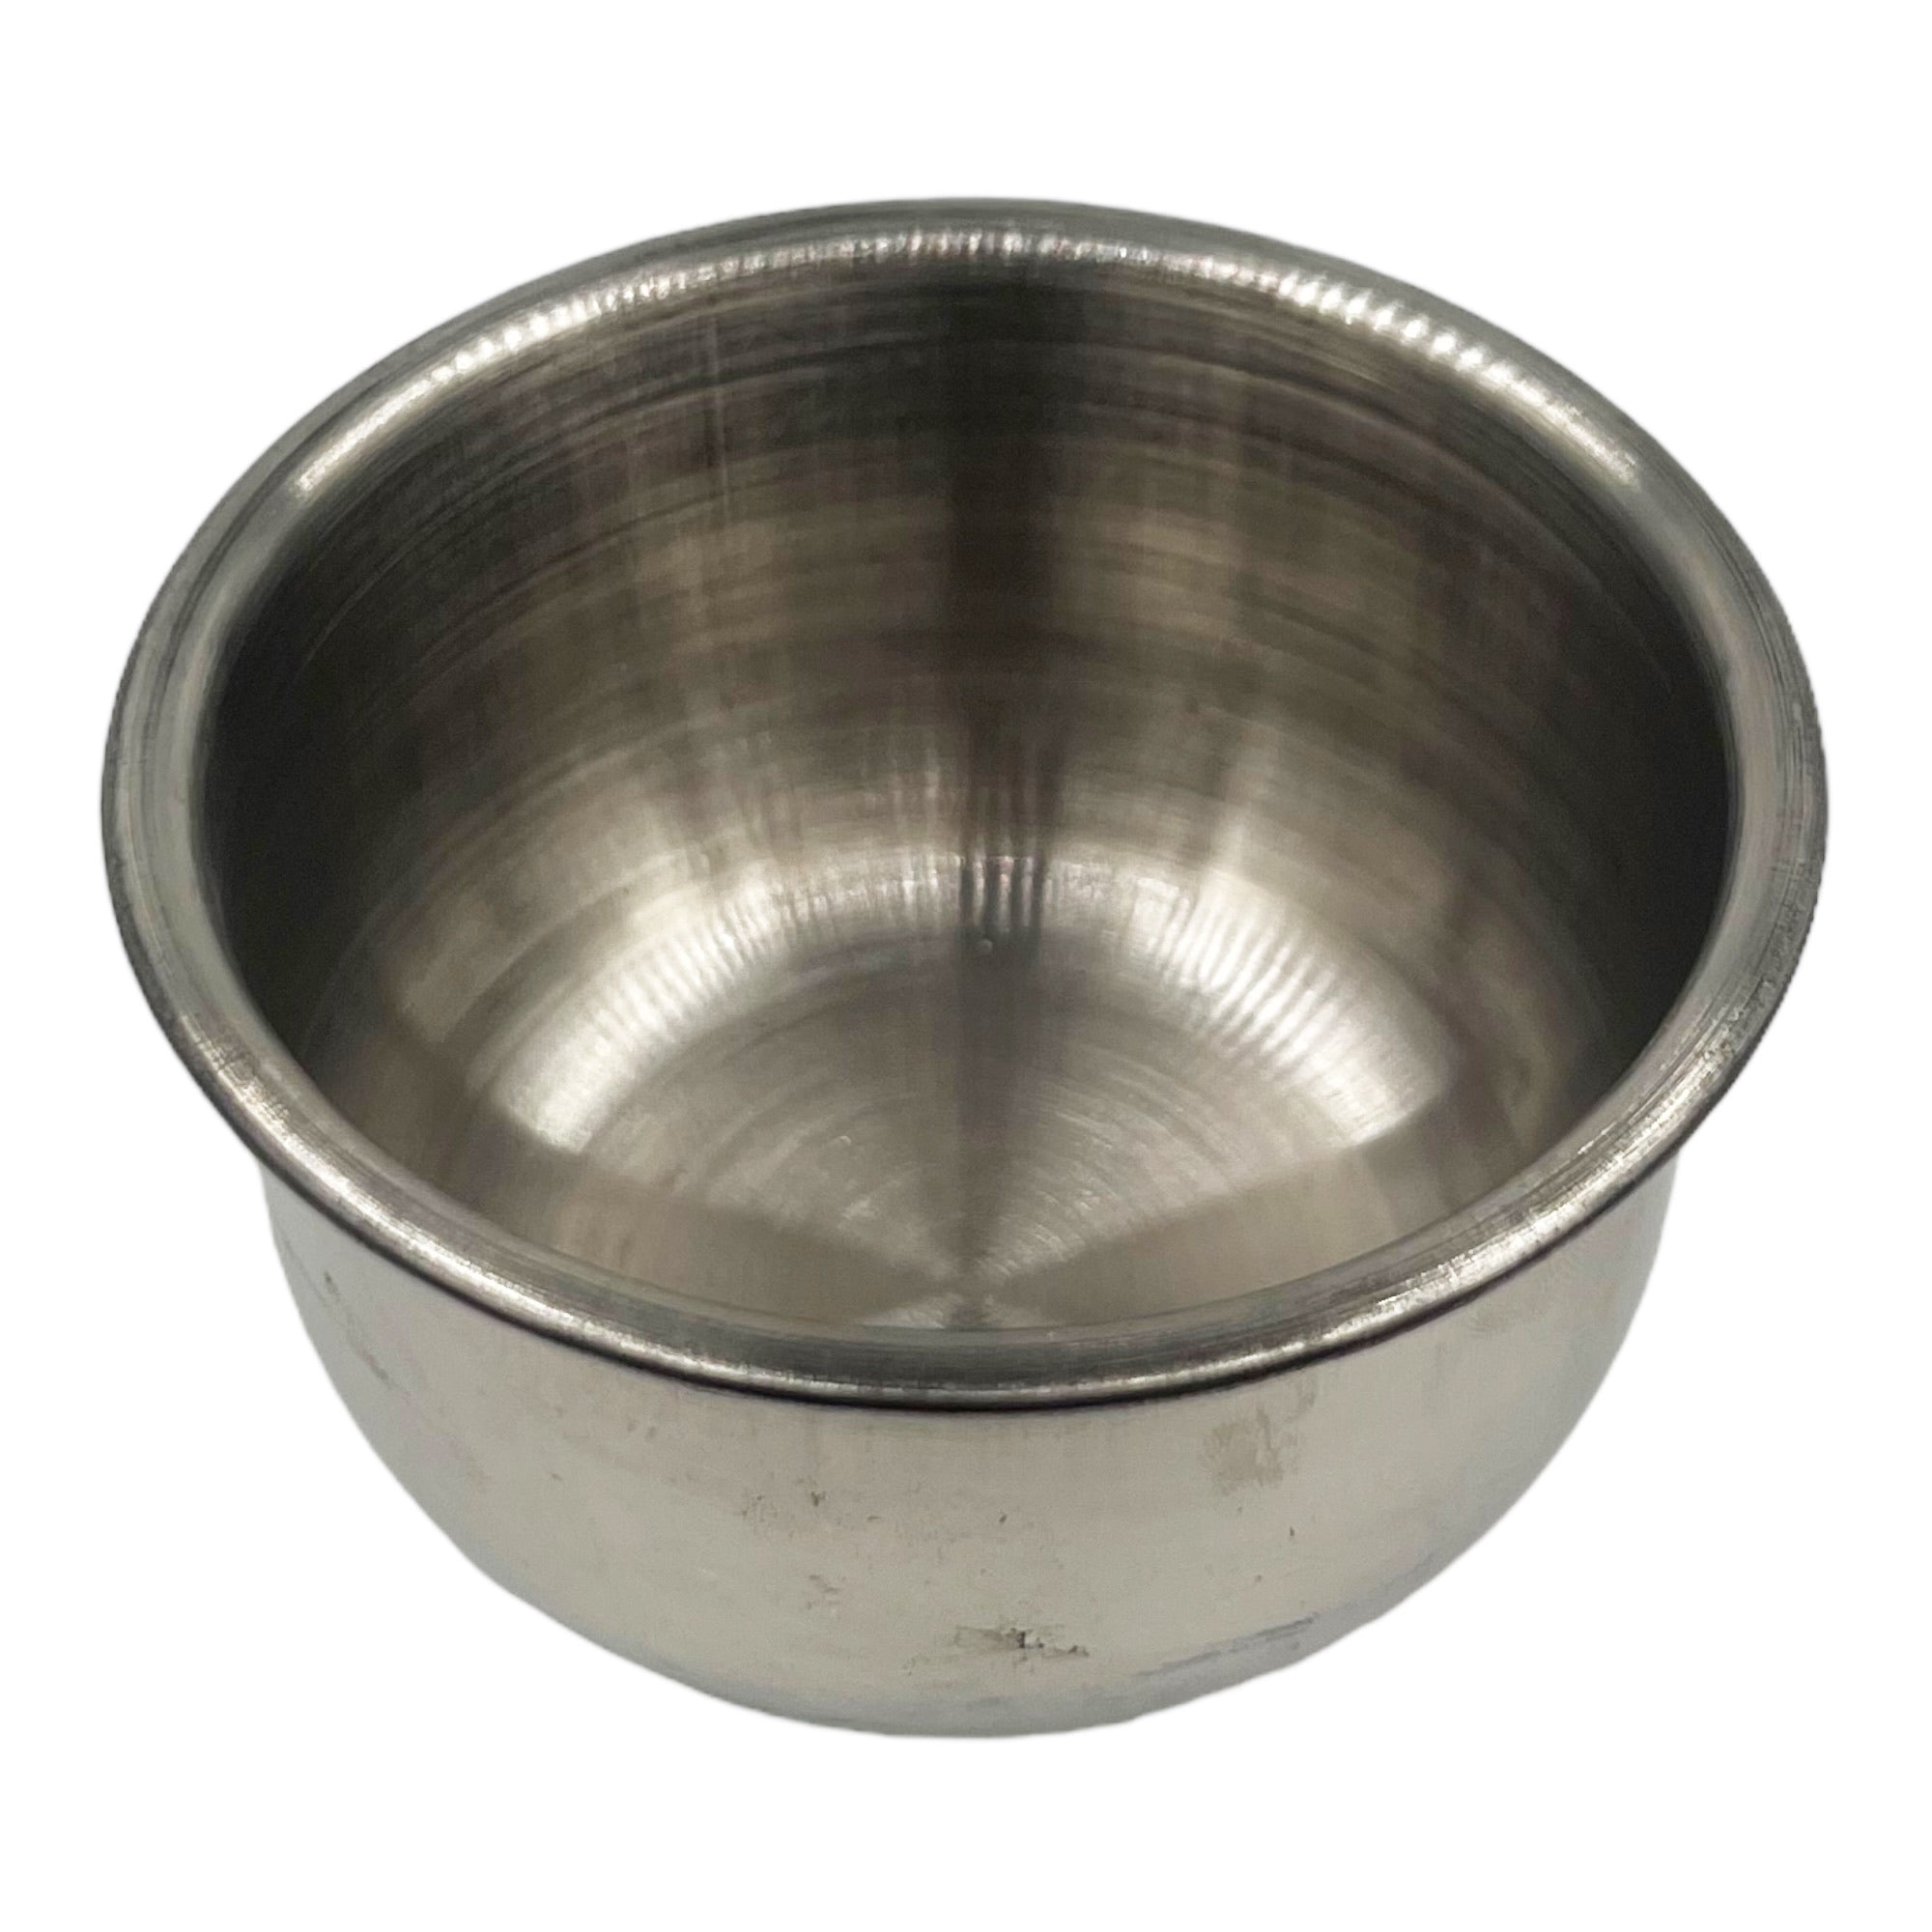 Eson - Stainless Steel Shaving Bowl Classic 9x5cm - Eson Direct